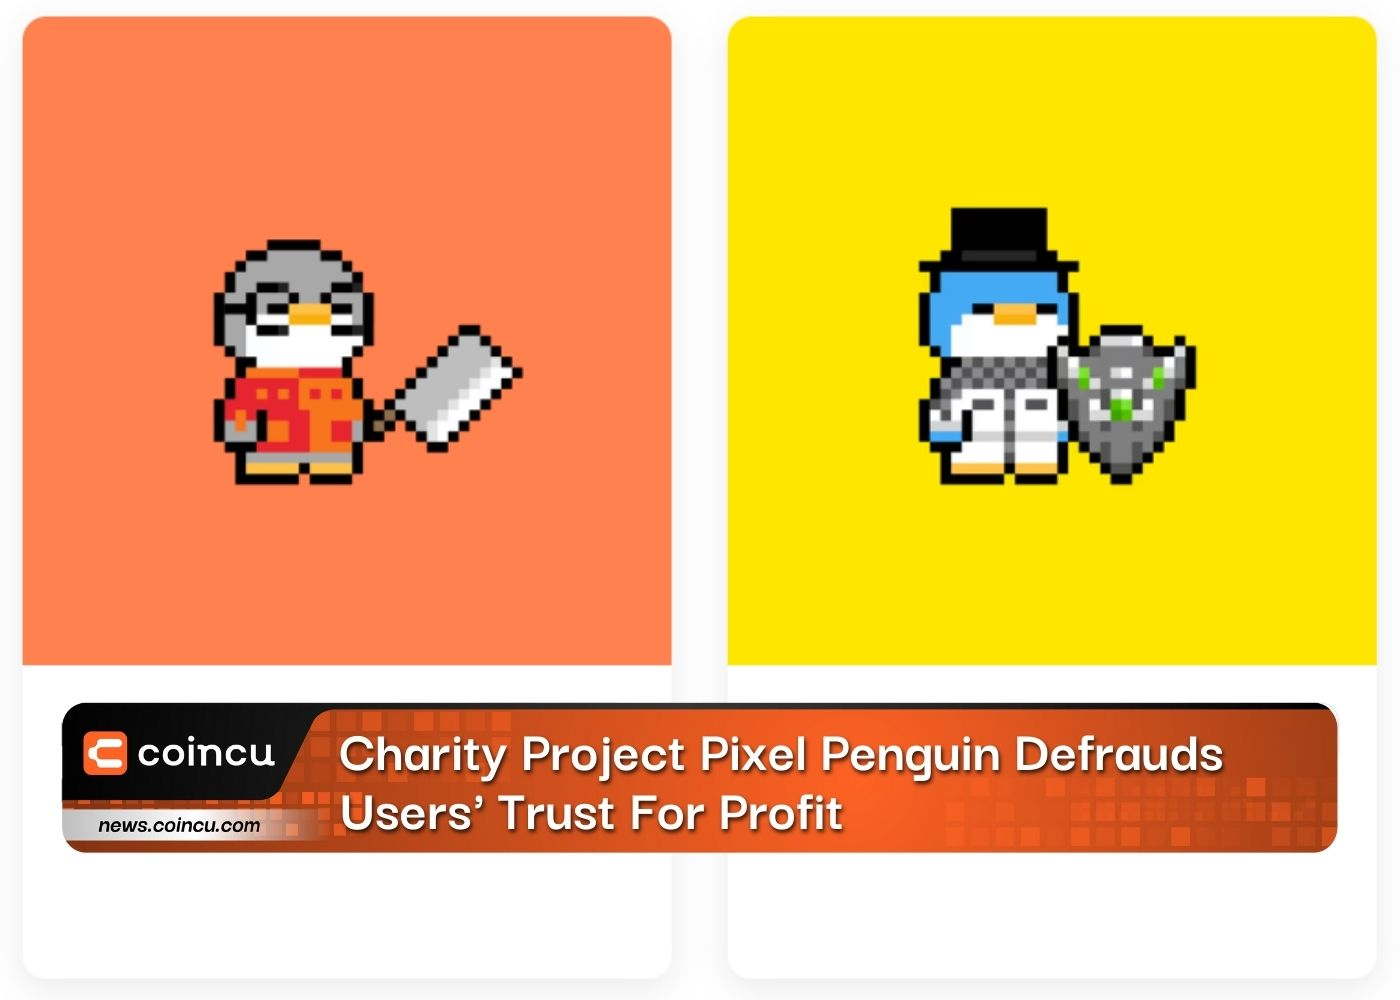 Charity Project Pixel Penguin Defrauds Users' Trust For Profit